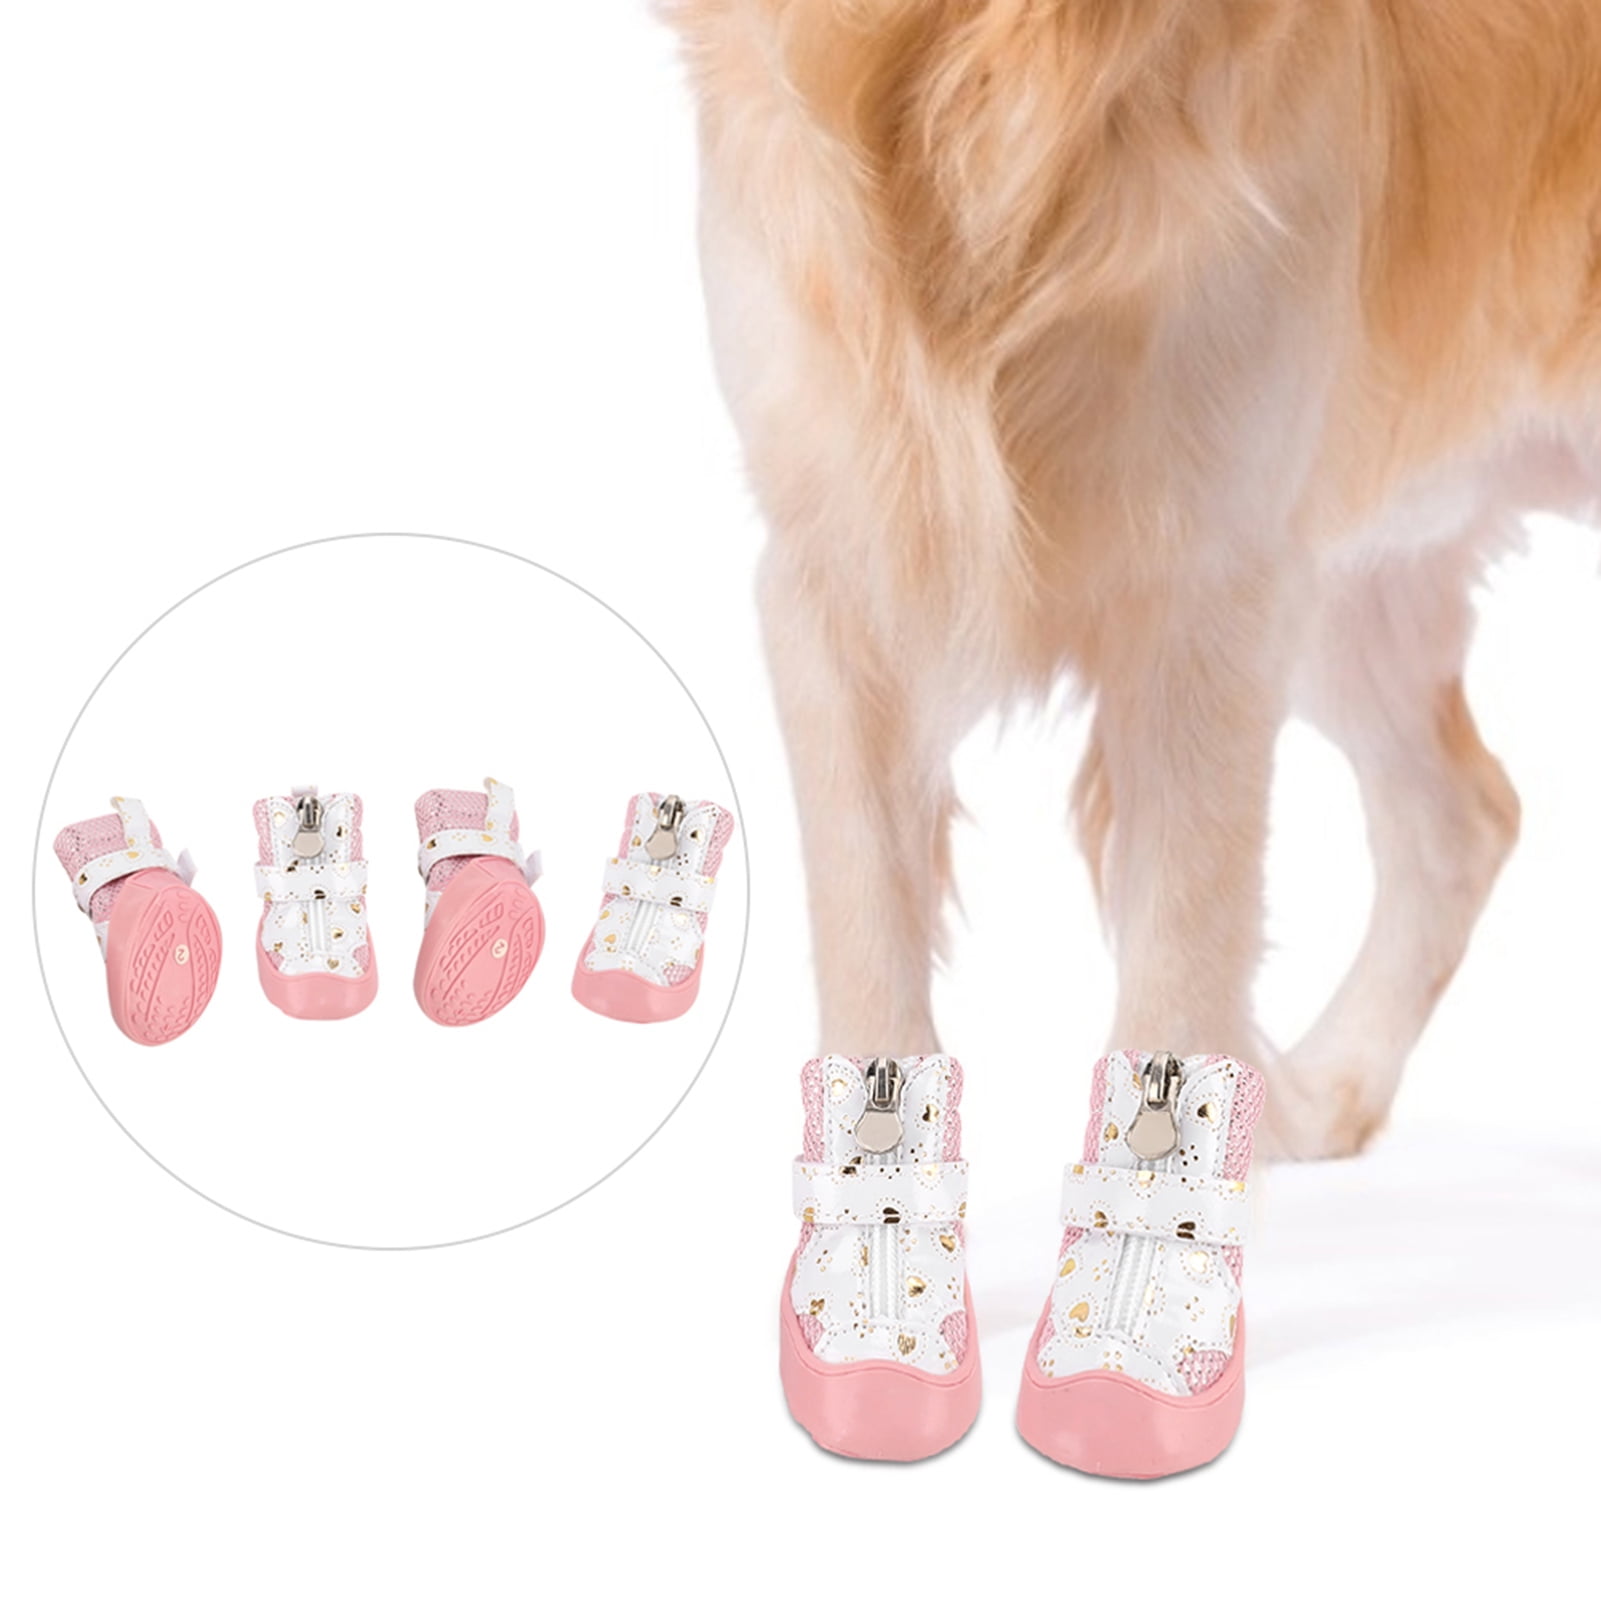 assistent Litteratur Genbruge Dog Shoes, Pink Puppy Shoes Pet Shoes, Super Soft For Daily Wearing Hiking  Running Climbing - Walmart.com